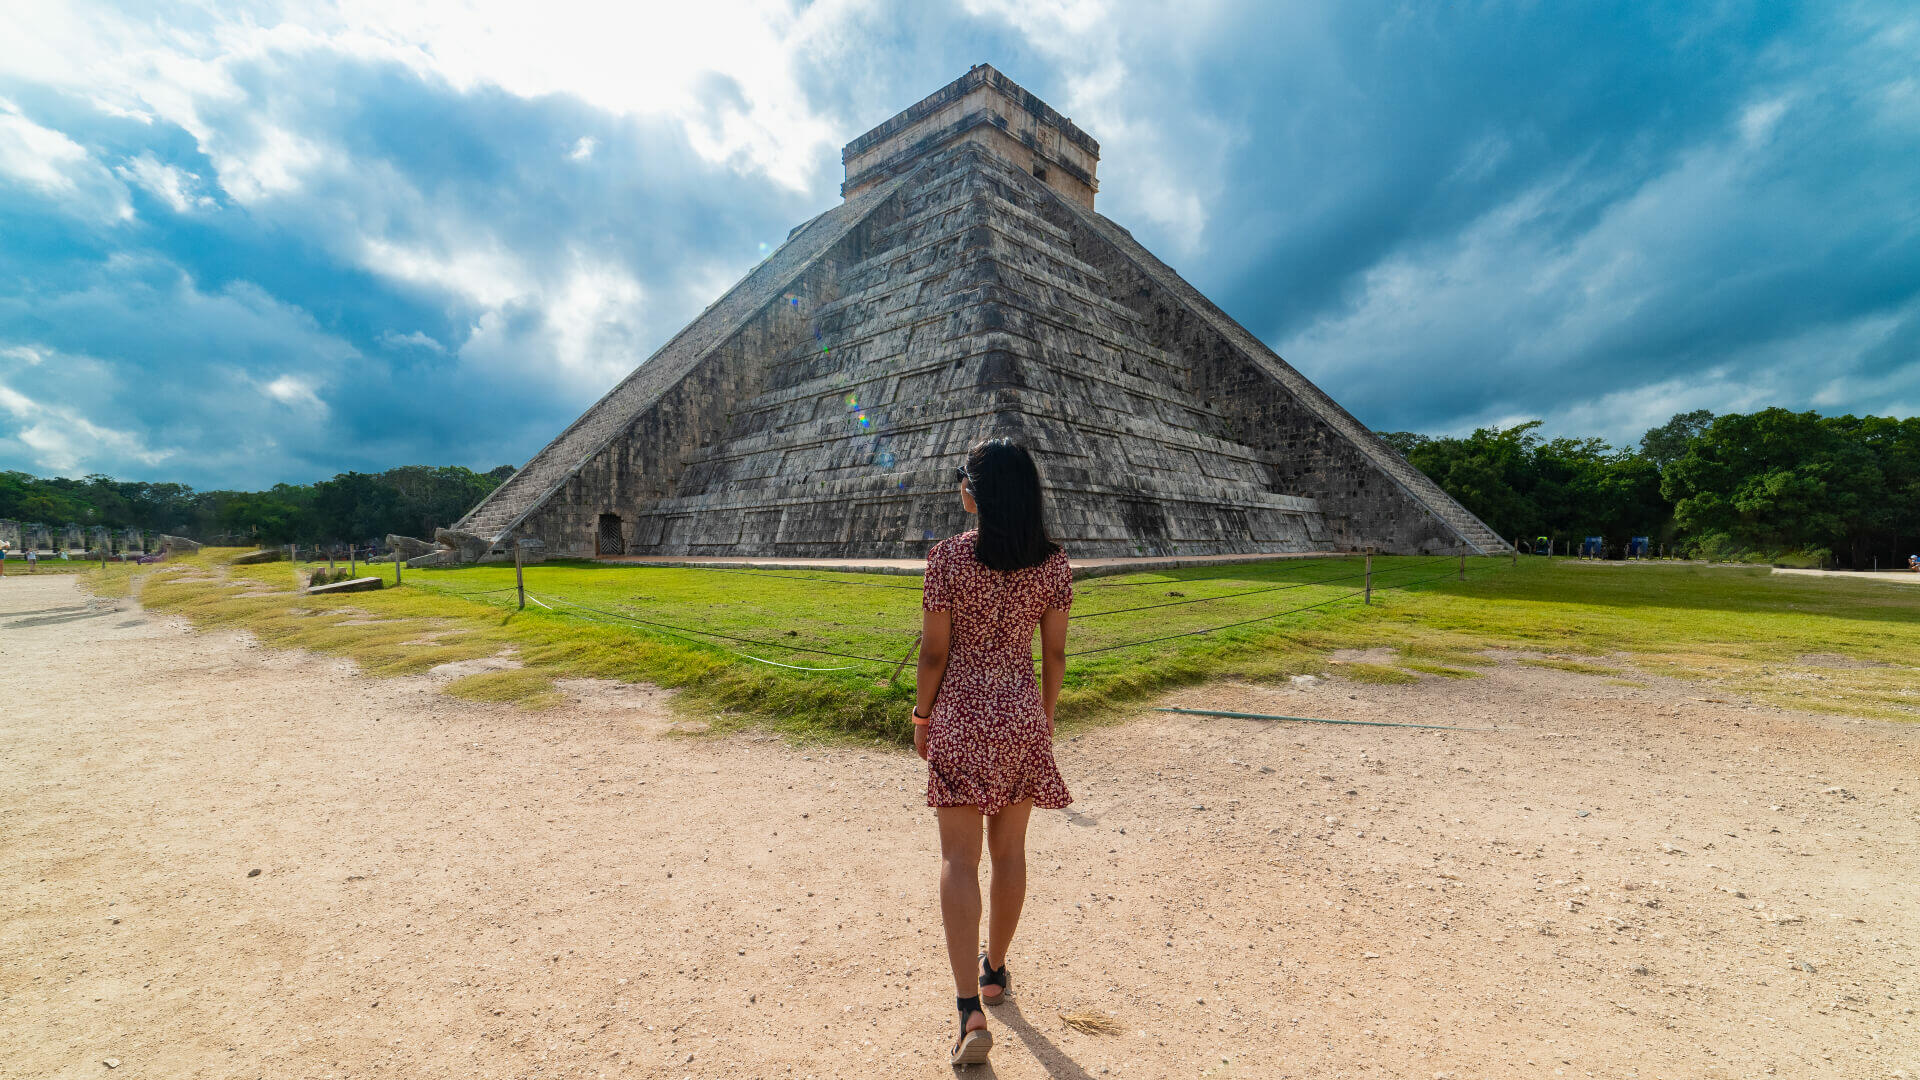 Exploring the sensuality of Chichen Itza: A tantalizing photo gallery